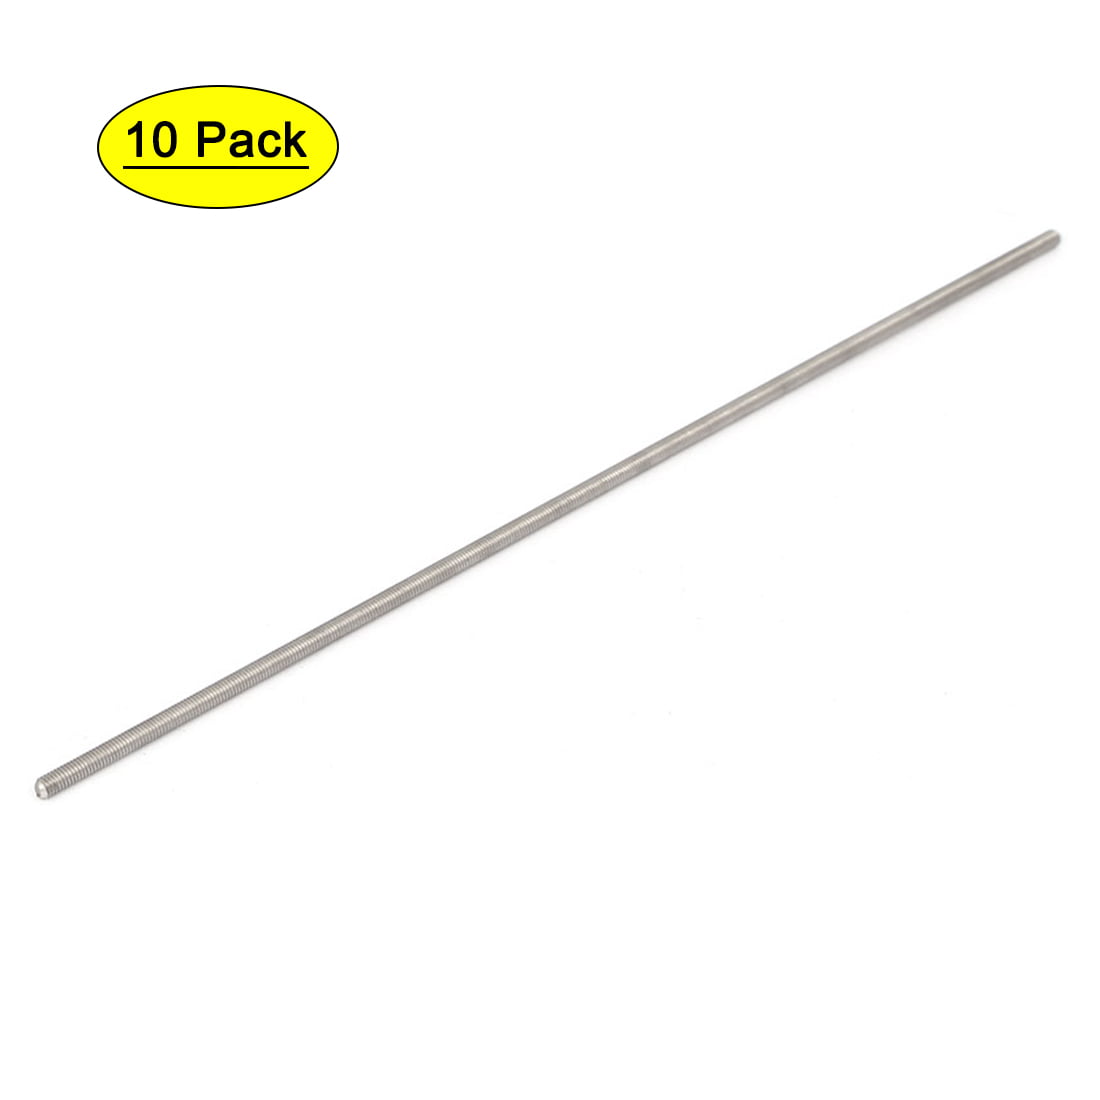 M3 x 110mm 0.5mm Pitch 304 Stainless Steel Fully Threaded Rods Hardware 10 Pcs 